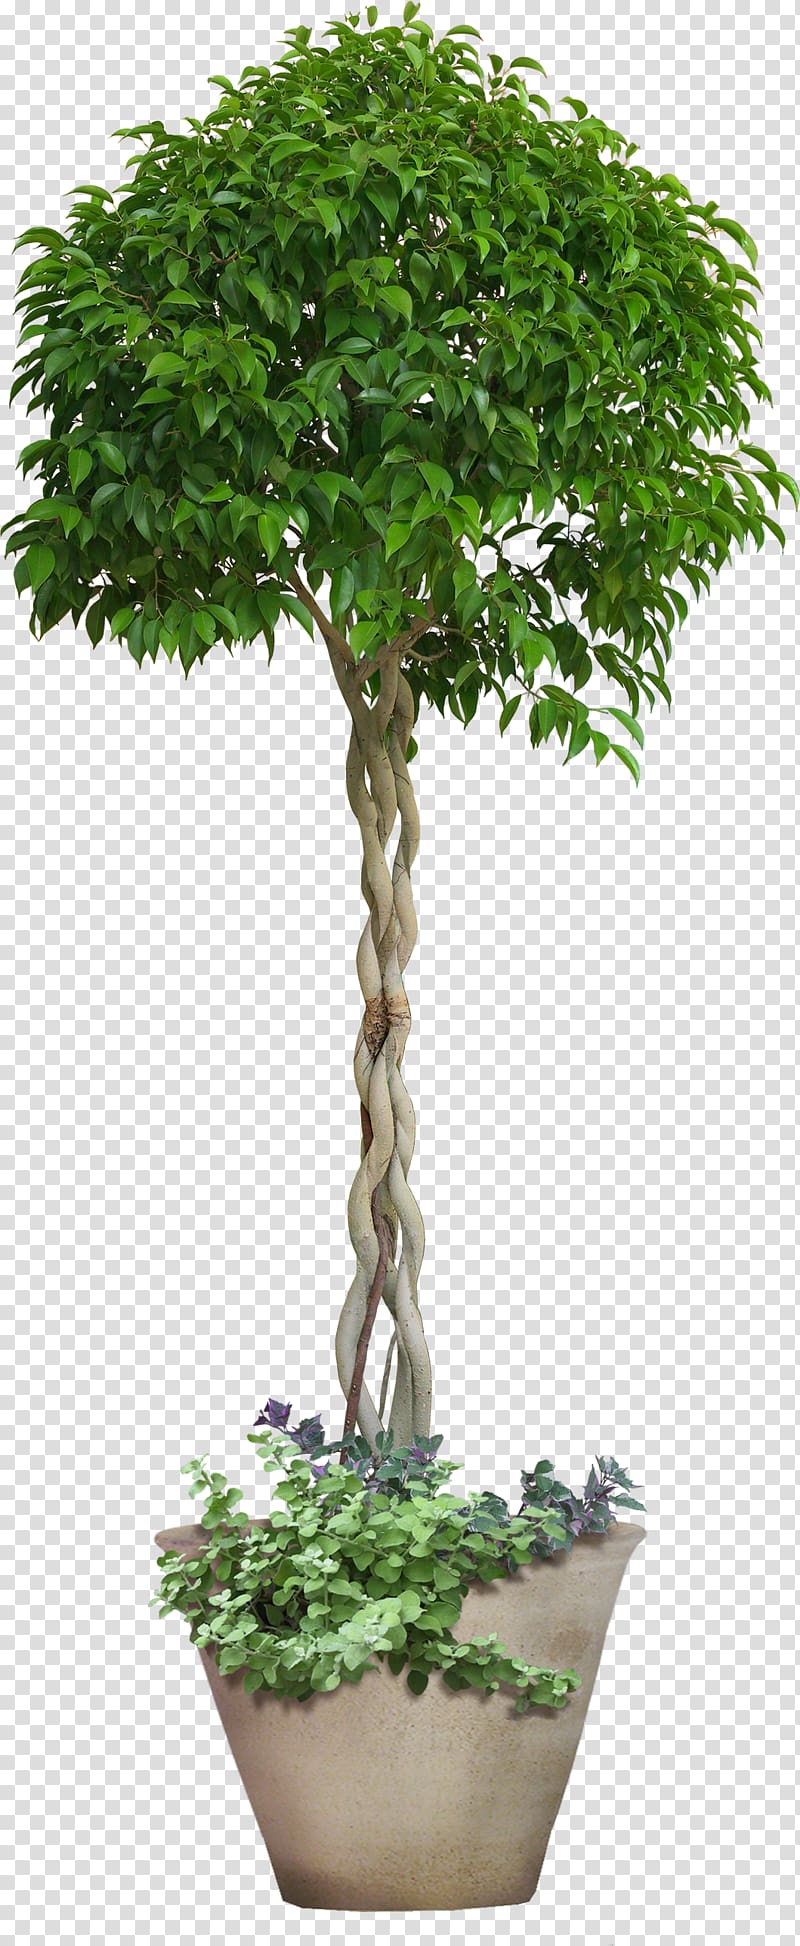 green Weeping fig plant and brown pot, Icon, Trees transparent background PNG clipart